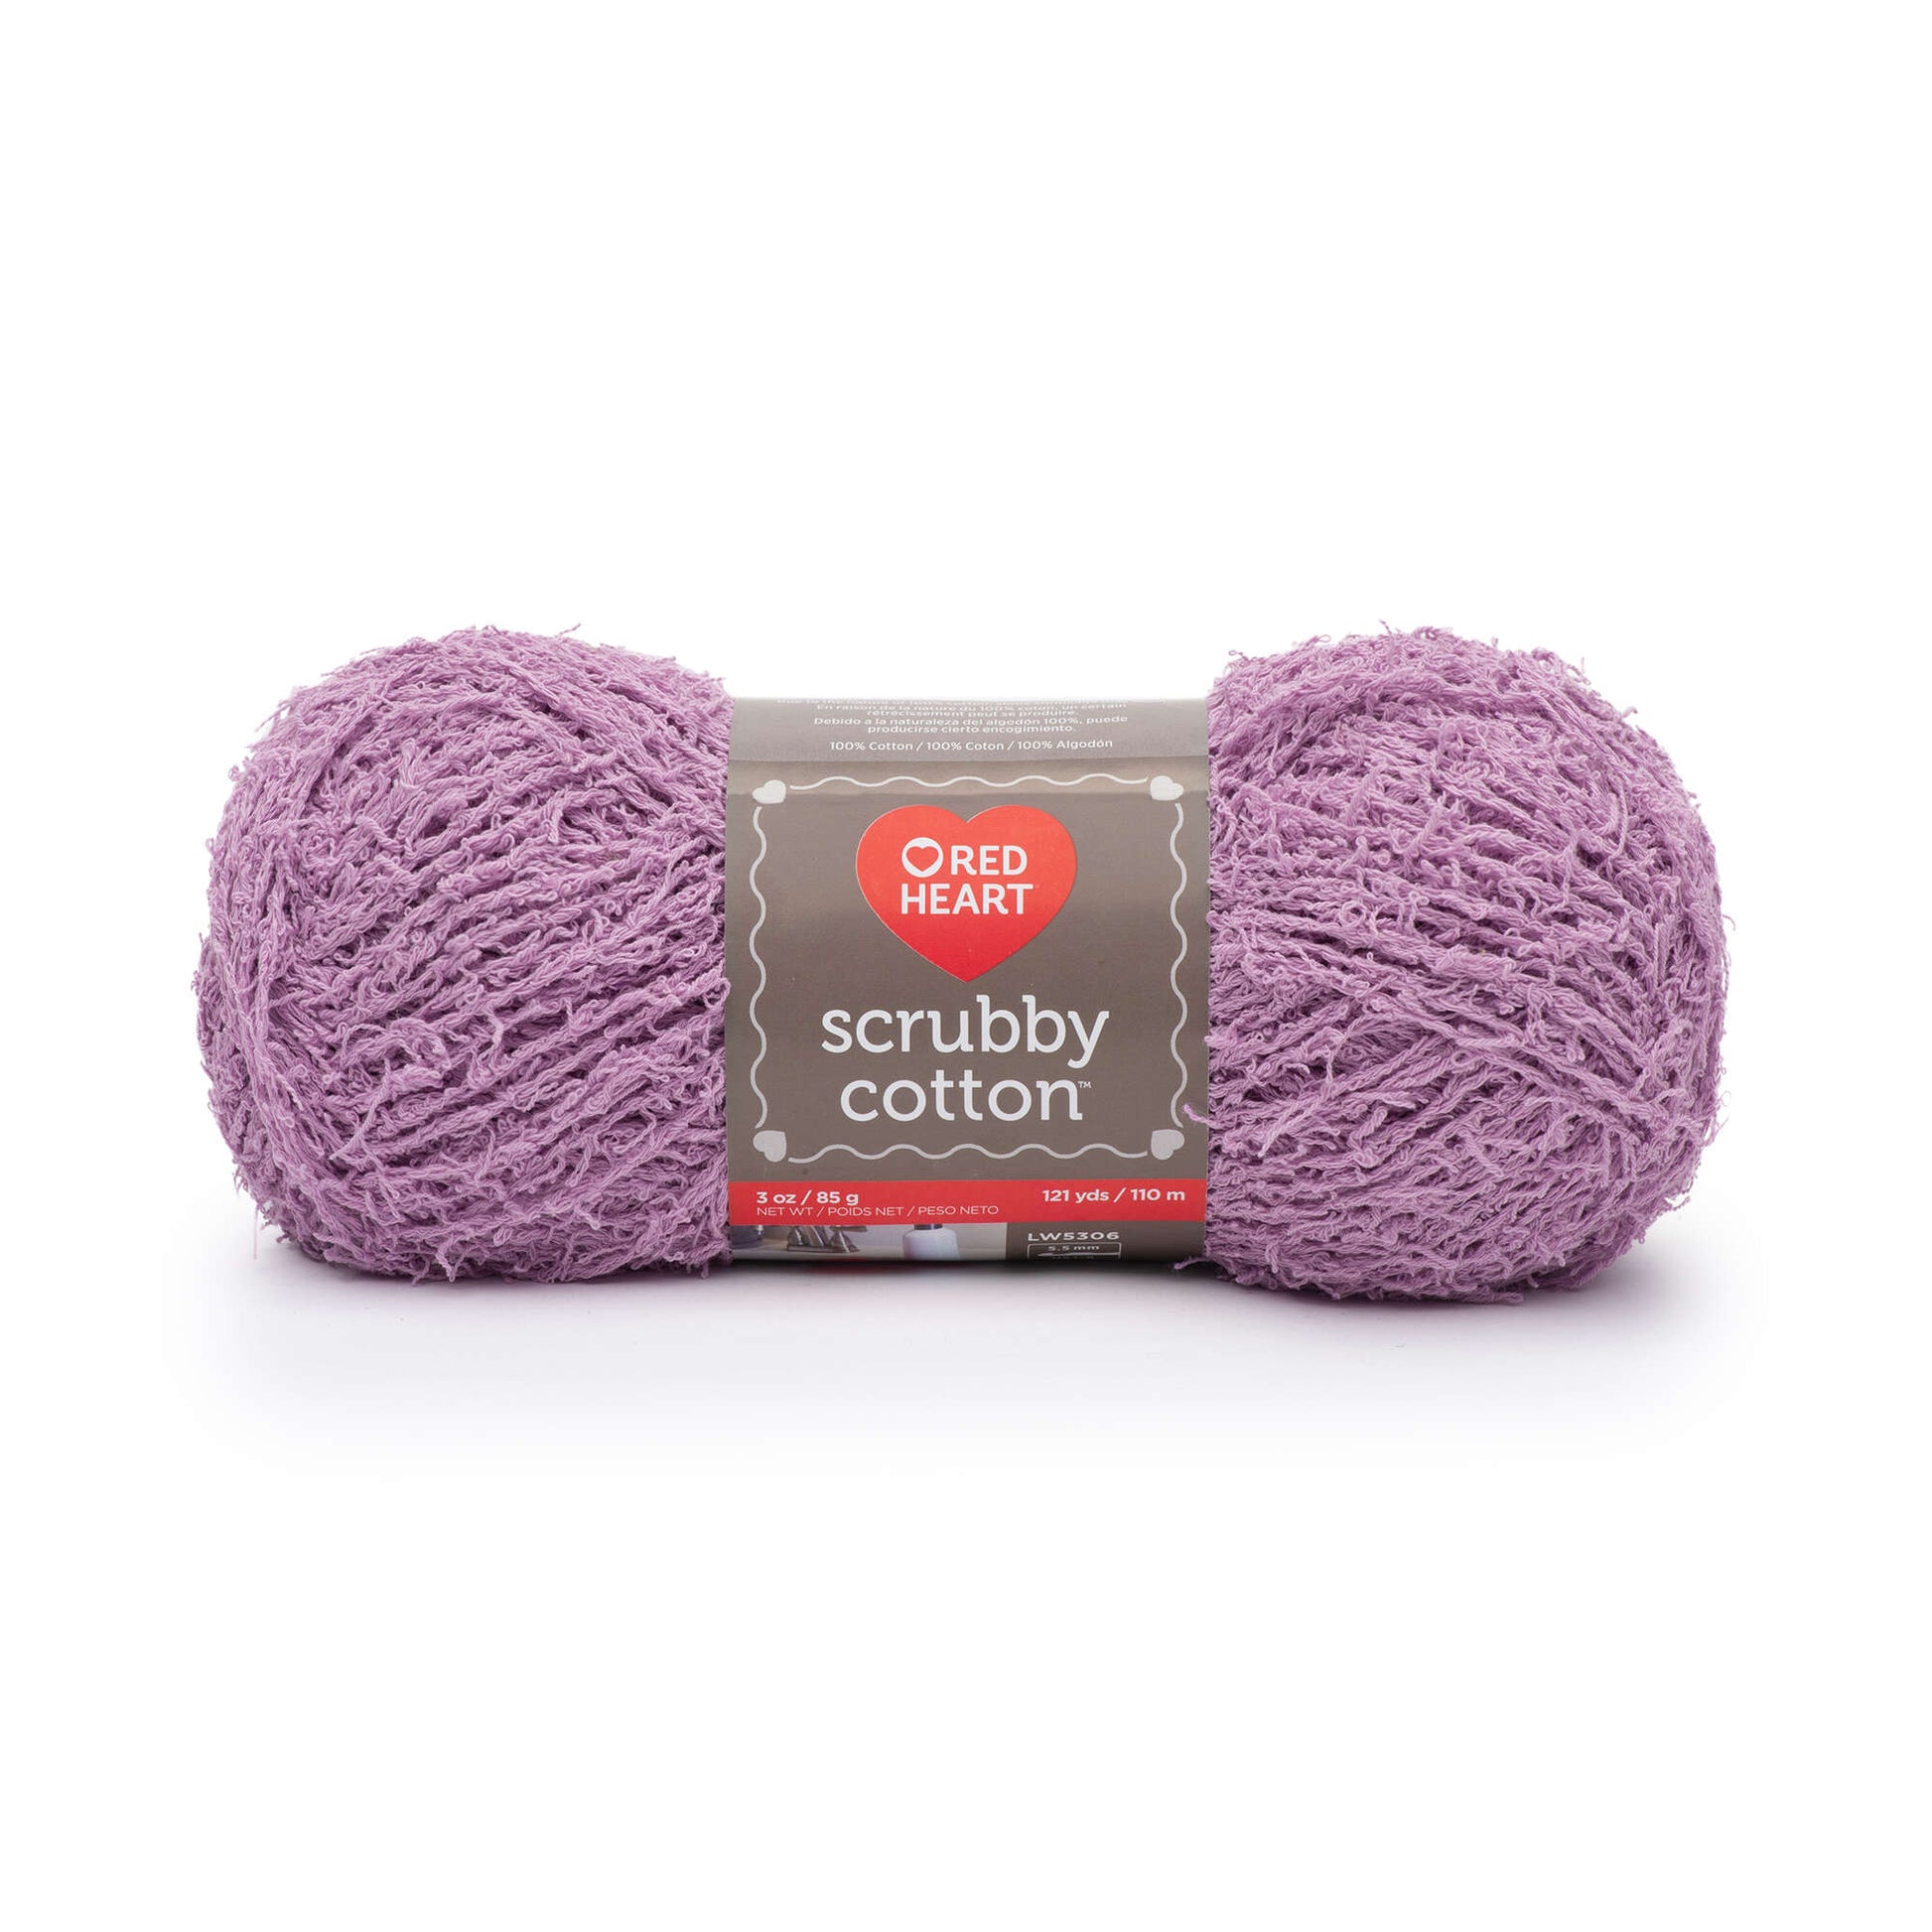 Yarn Review: Red Heart Scrubby Cotton